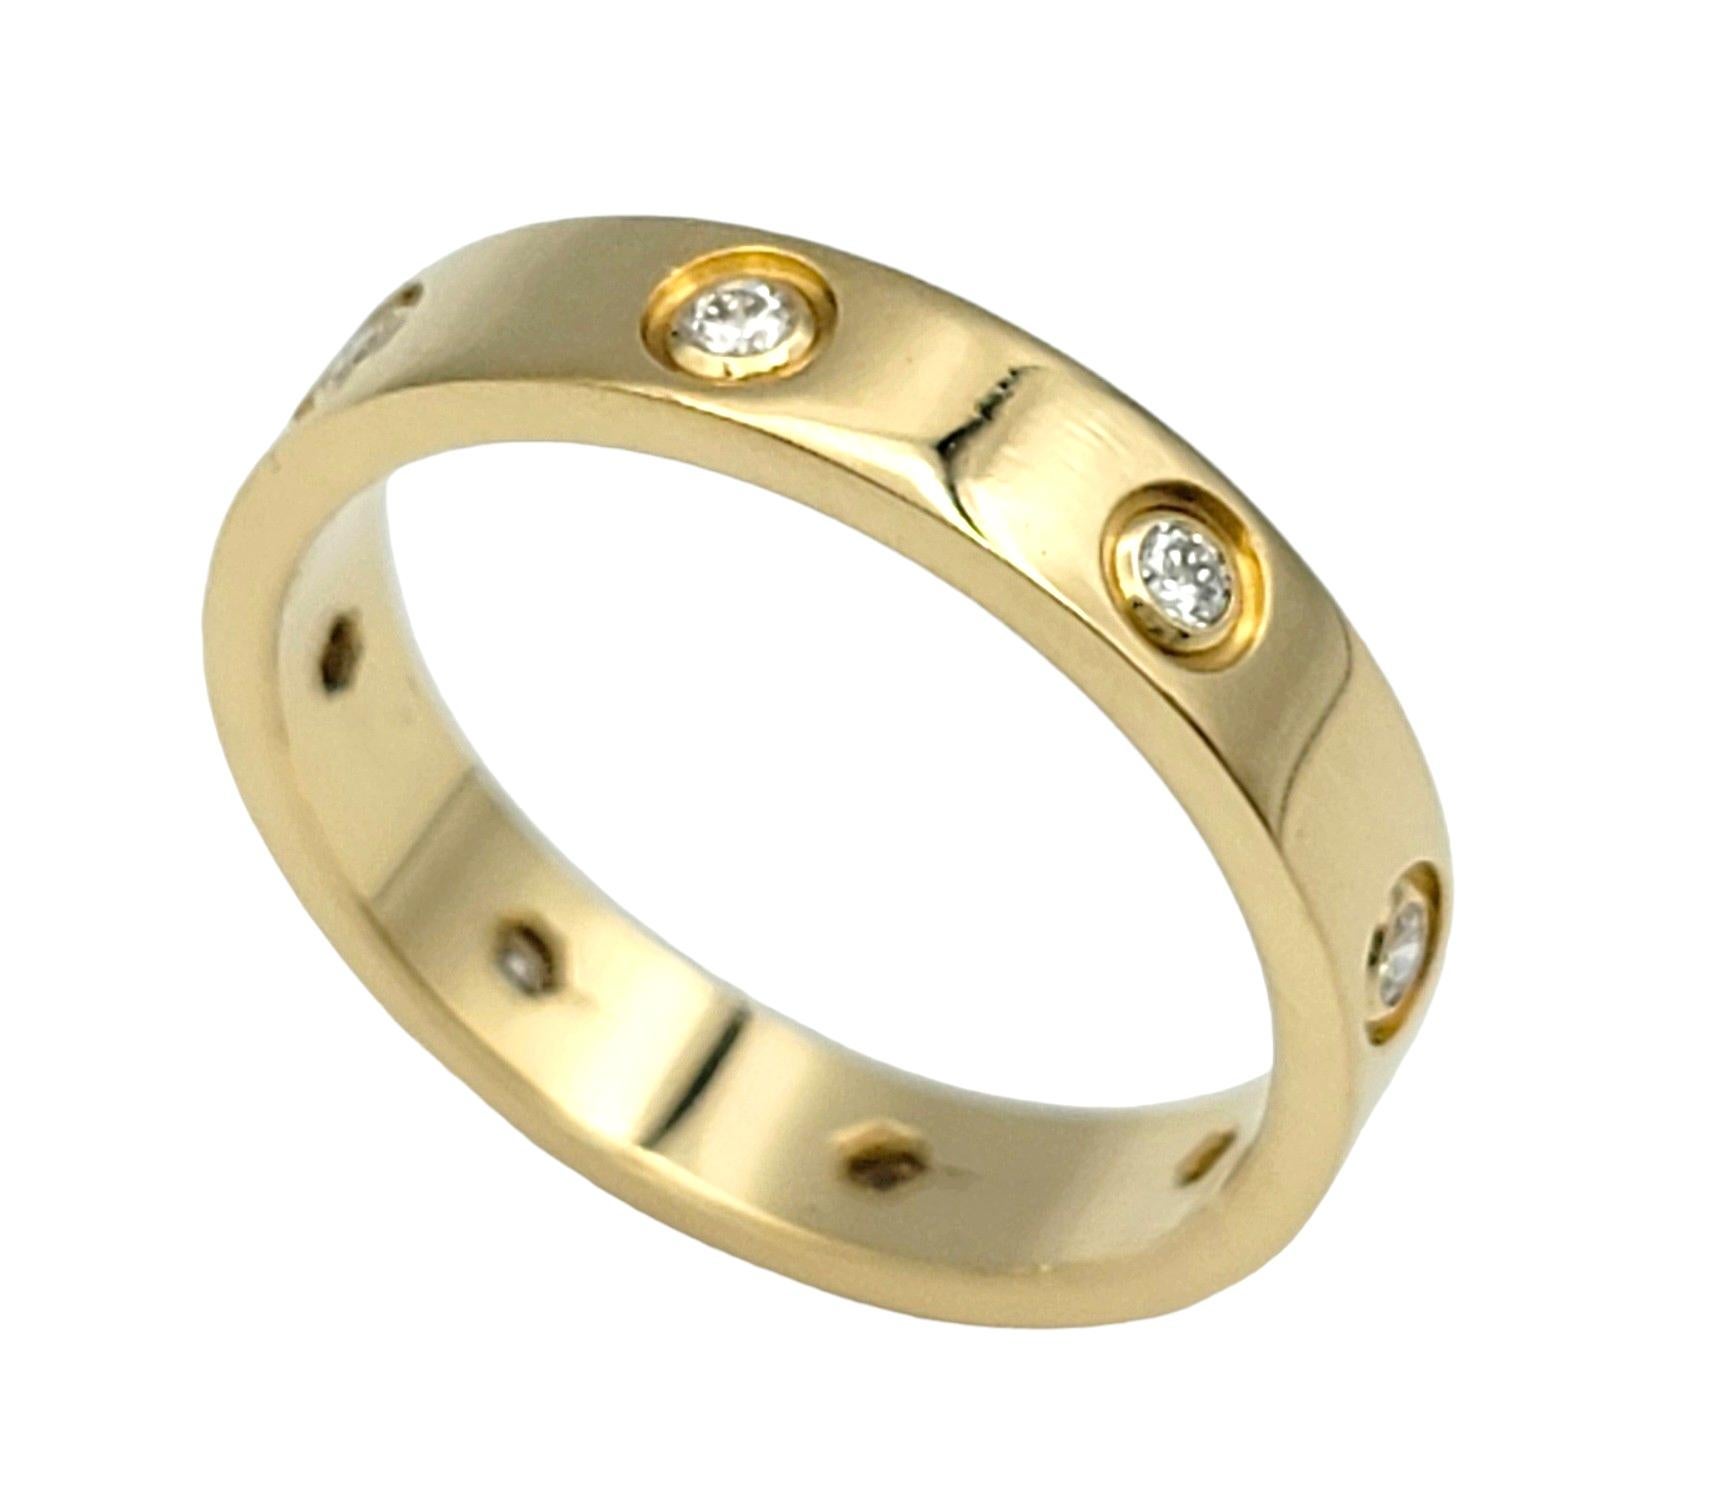 Contemporary Cartier Love Wedding Band Ring with Diamonds Set in 18 Karat Yellow Gold For Sale